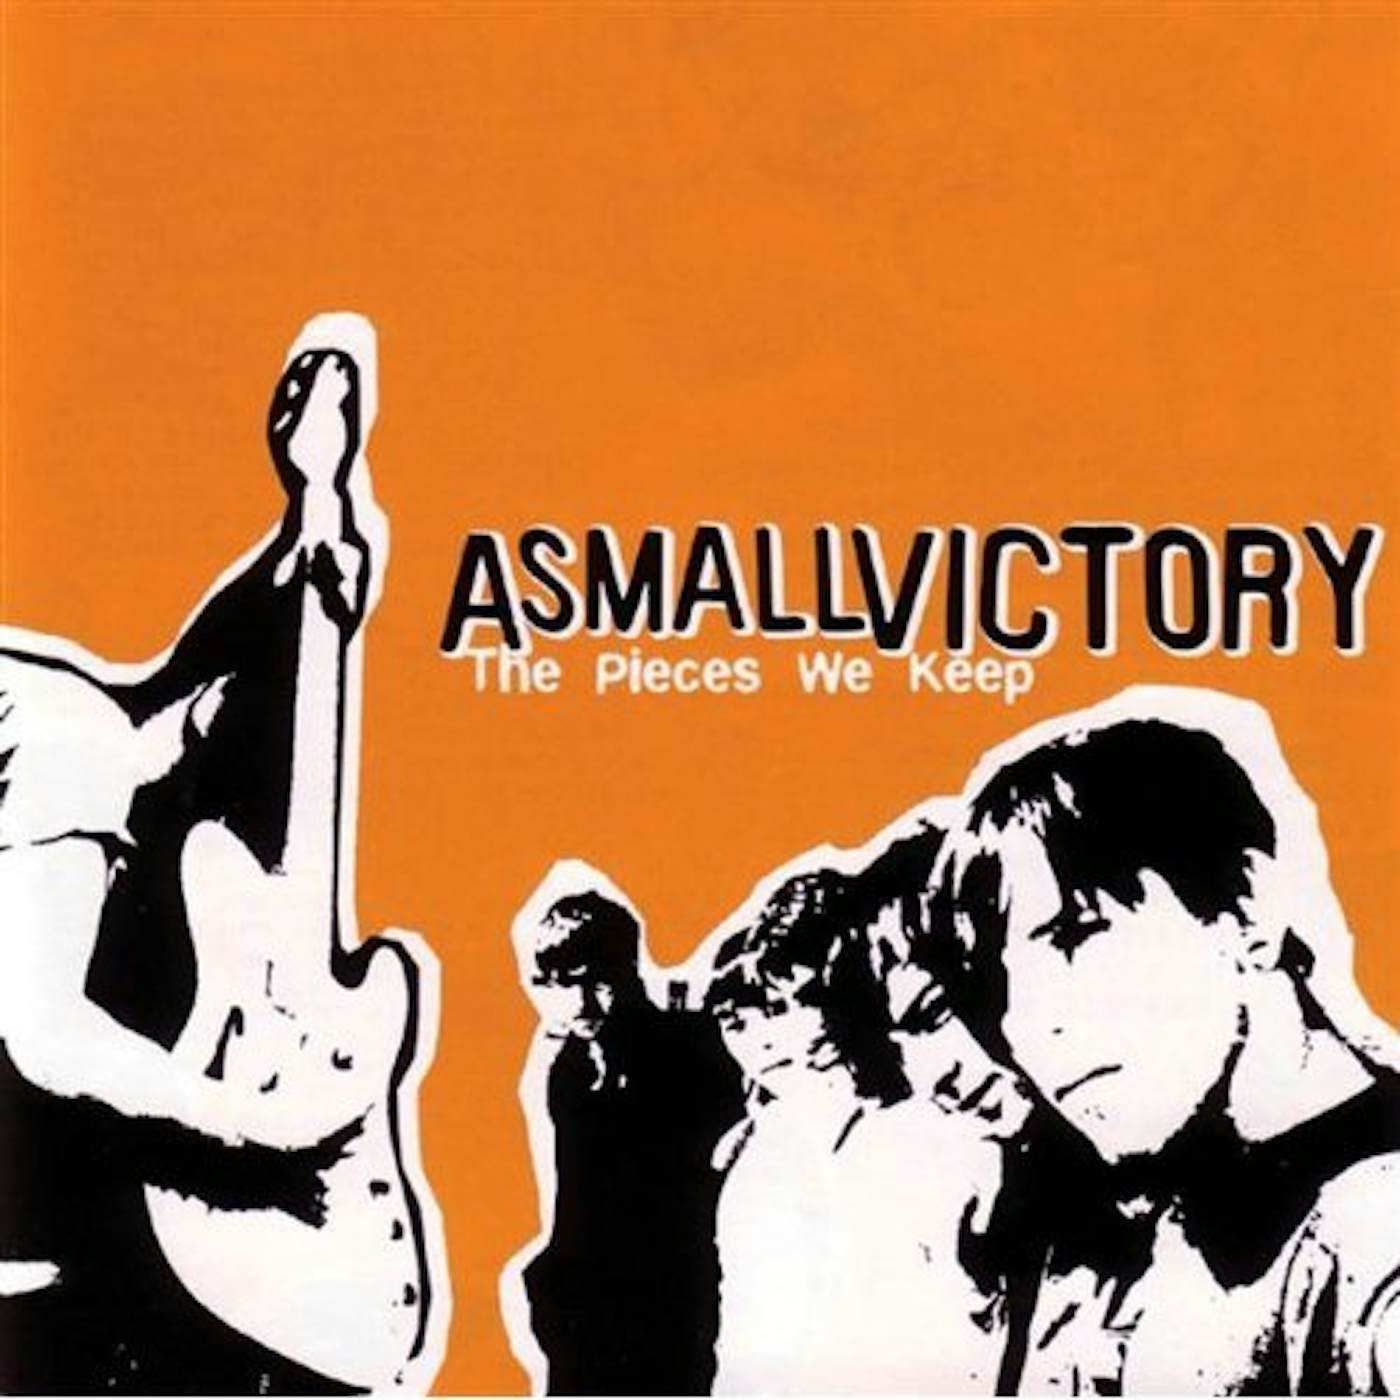 A Small Victory PIECES WE KEEP CD